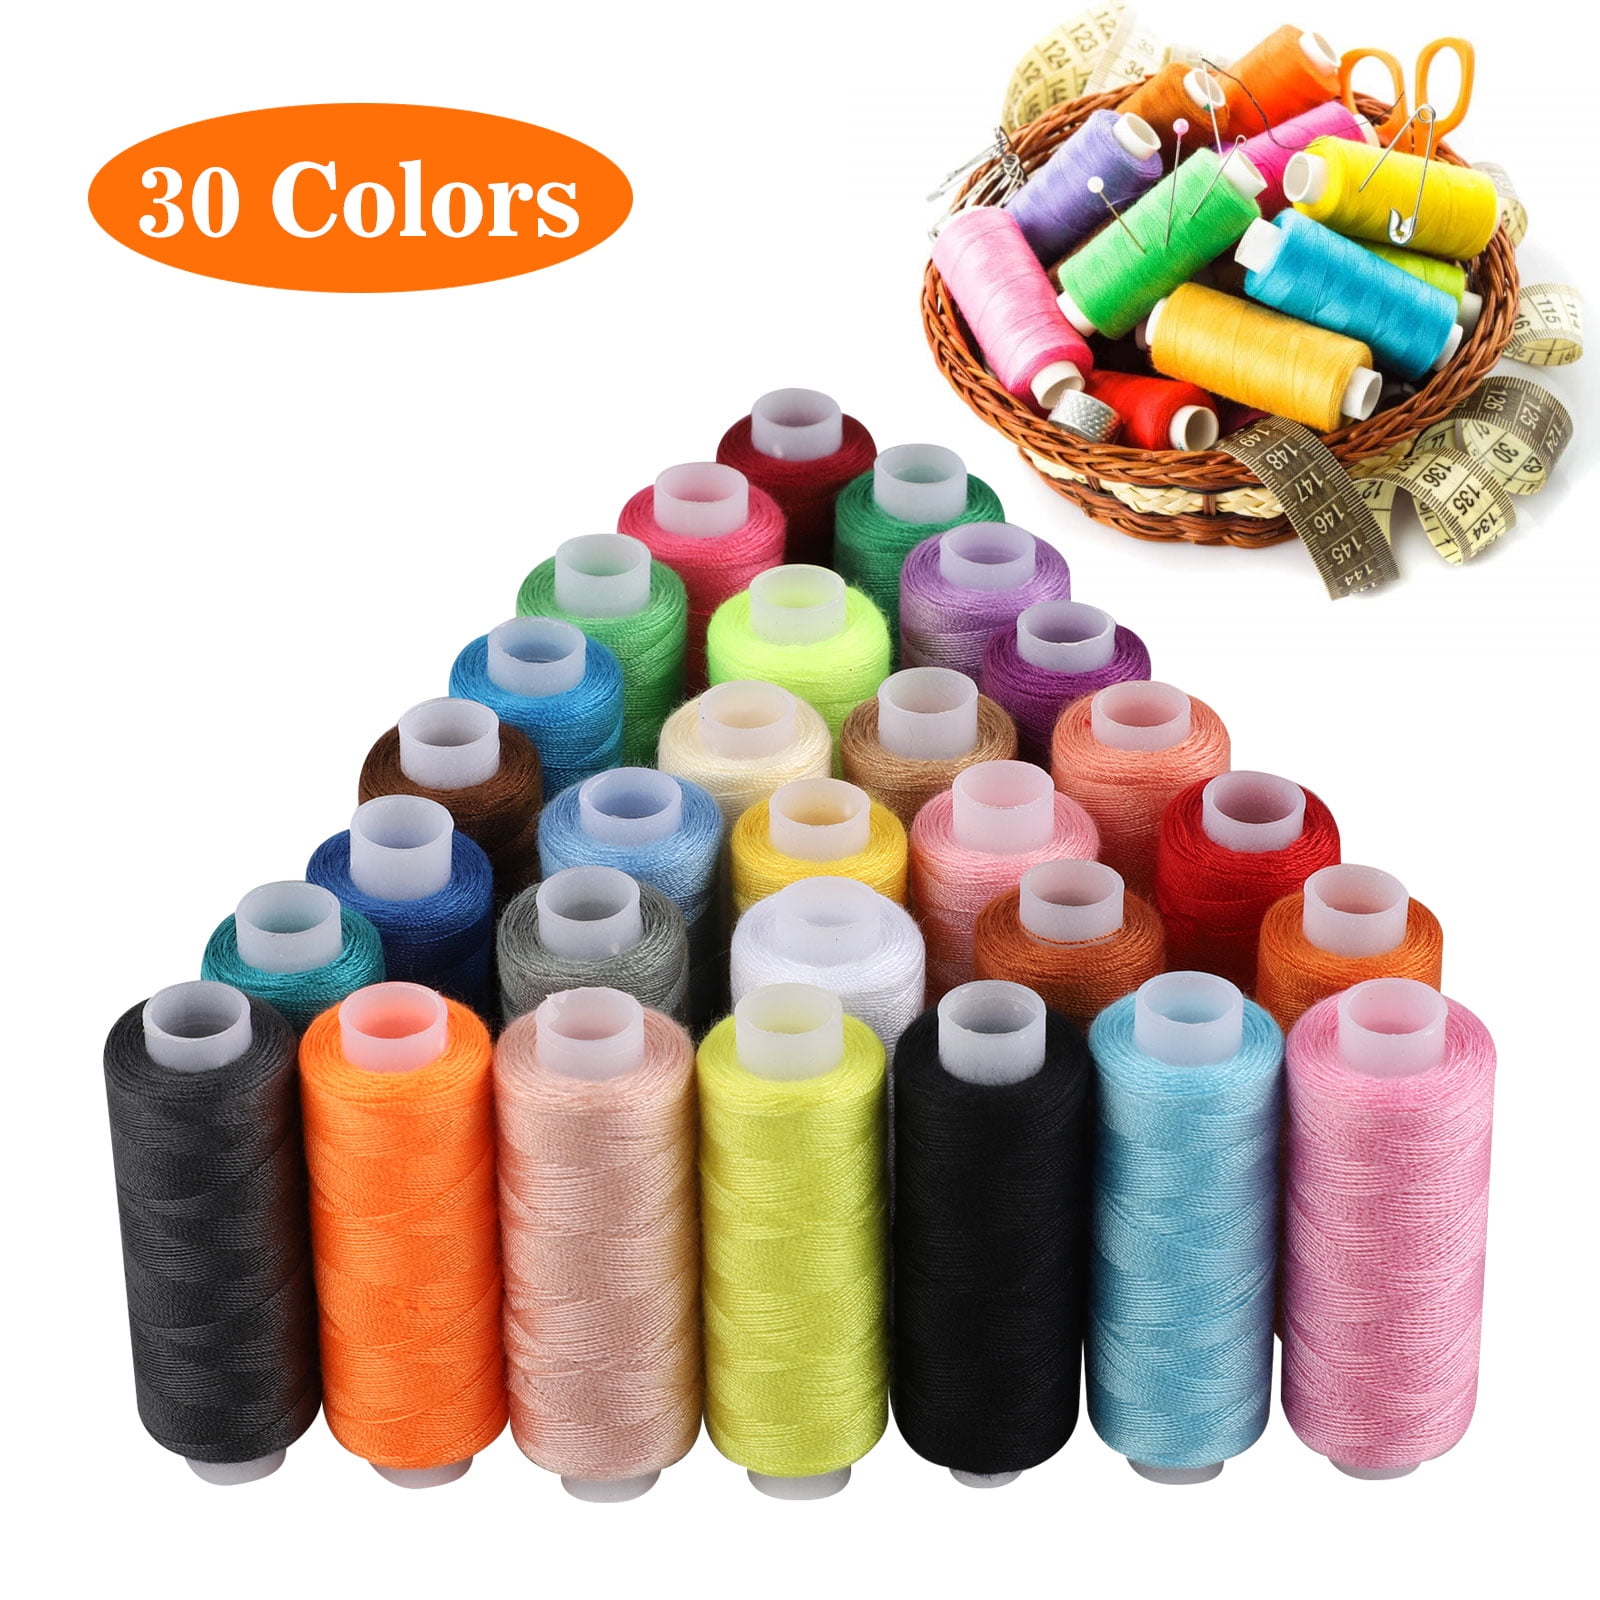 30 Metallic Embroidery Threads Spools 30 different Colors 400 yard Bargain Price 